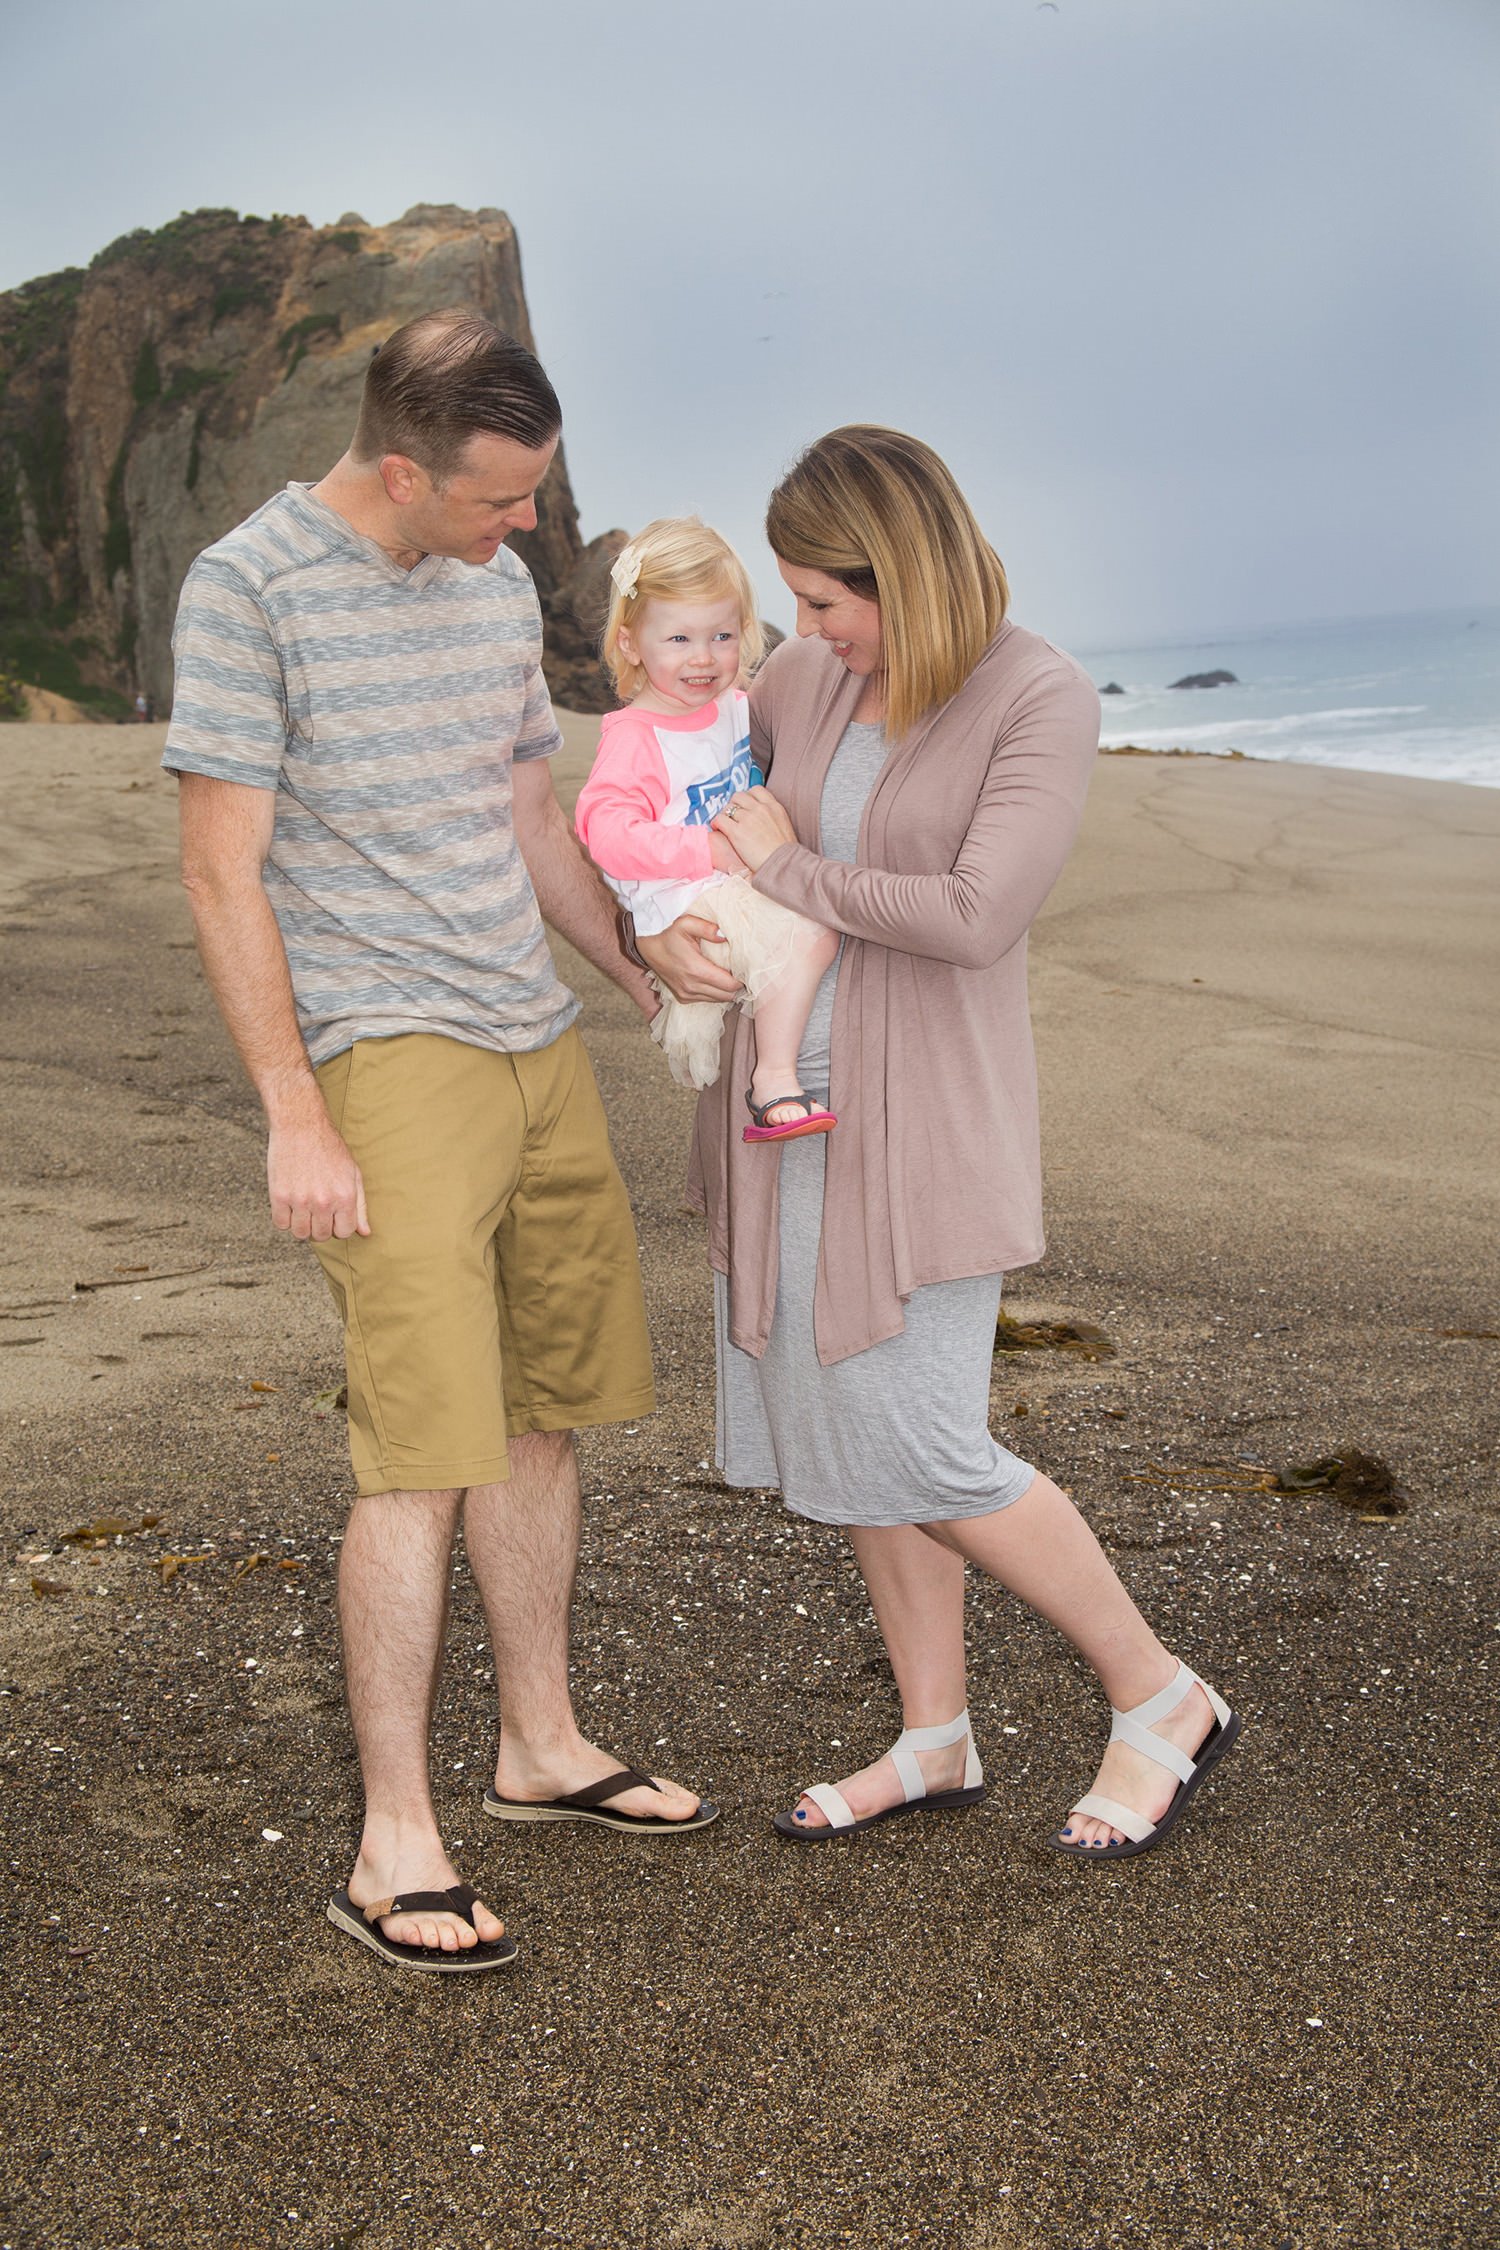 Want to know what to wear in family photos? These family pictures at the beach are great family photo inspiration!